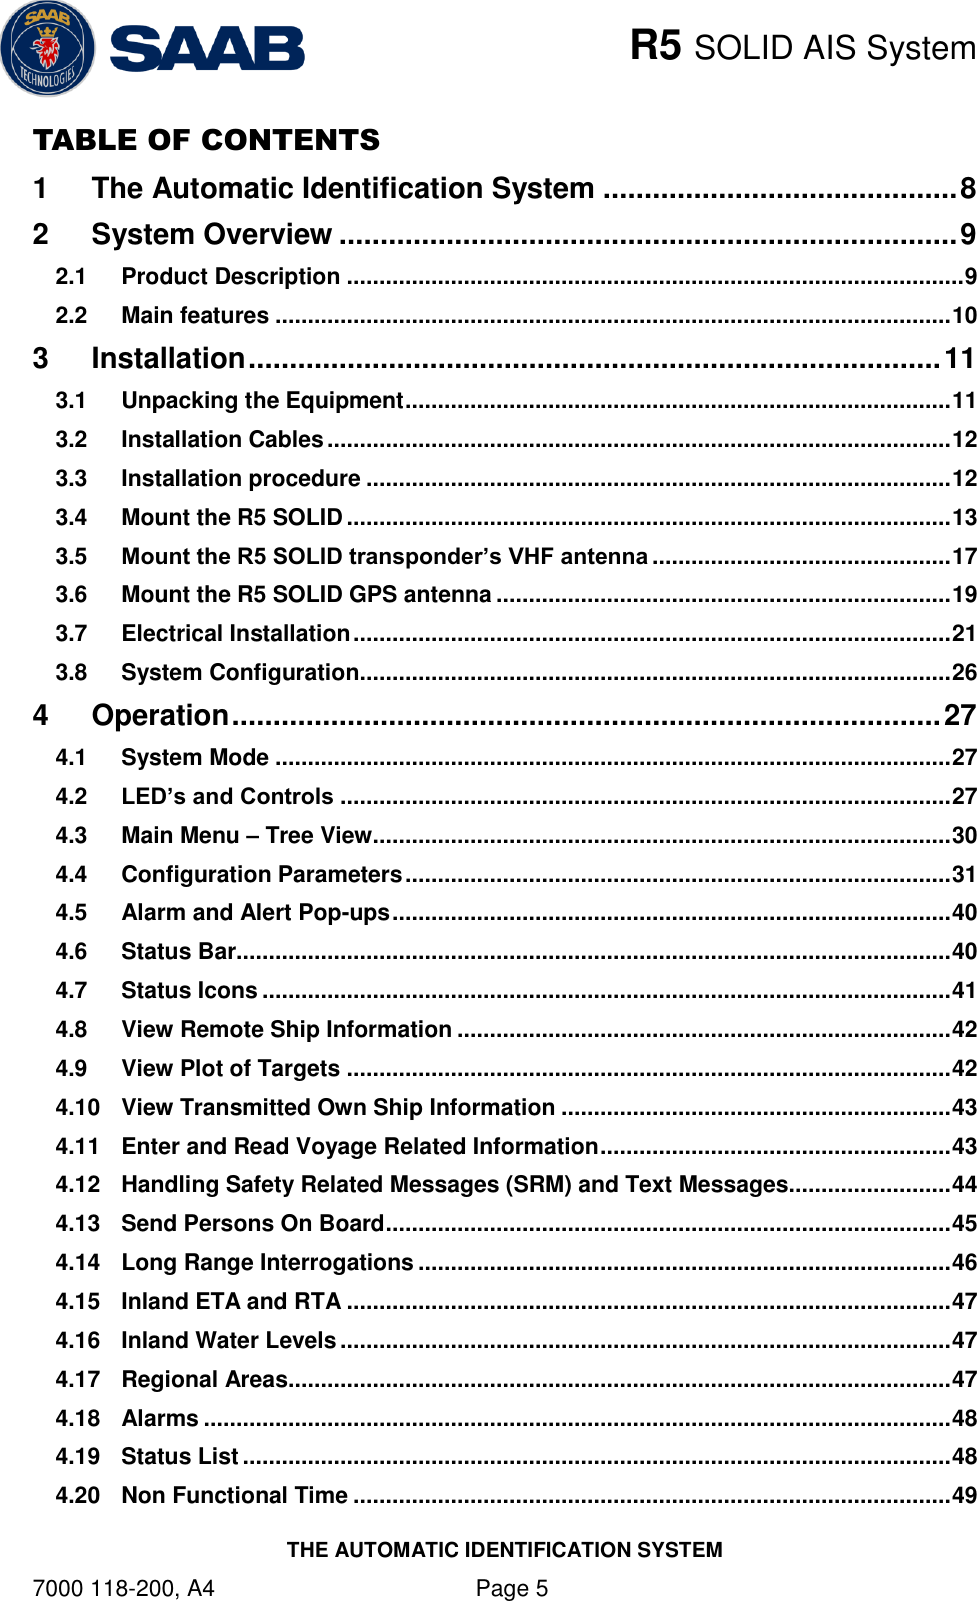    R5 SOLID AIS System THE AUTOMATIC IDENTIFICATION SYSTEM 7000 118-200, A4    Page 5 TABLE OF CONTENTS 1 The Automatic Identification System ........................................... 8 2 System Overview ........................................................................... 9 2.1 Product Description ............................................................................................... 9 2.2 Main features ........................................................................................................ 10 3 Installation .................................................................................... 11 3.1 Unpacking the Equipment .................................................................................... 11 3.2 Installation Cables ................................................................................................ 12 3.3 Installation procedure .......................................................................................... 12 3.4 Mount the R5 SOLID ............................................................................................. 13 3.5 Mount the R5 SOLID transponder’s VHF antenna .............................................. 17 3.6 Mount the R5 SOLID GPS antenna ...................................................................... 19 3.7 Electrical Installation ............................................................................................ 21 3.8 System Configuration ........................................................................................... 26 4 Operation ...................................................................................... 27 4.1 System Mode ........................................................................................................ 27 4.2 LED’s and Controls .............................................................................................. 27 4.3 Main Menu – Tree View ......................................................................................... 30 4.4 Configuration Parameters .................................................................................... 31 4.5 Alarm and Alert Pop-ups ...................................................................................... 40 4.6 Status Bar.............................................................................................................. 40 4.7 Status Icons .......................................................................................................... 41 4.8 View Remote Ship Information ............................................................................ 42 4.9 View Plot of Targets ............................................................................................. 42 4.10 View Transmitted Own Ship Information ............................................................ 43 4.11 Enter and Read Voyage Related Information ...................................................... 43 4.12 Handling Safety Related Messages (SRM) and Text Messages......................... 44 4.13 Send Persons On Board ....................................................................................... 45 4.14 Long Range Interrogations .................................................................................. 46 4.15 Inland ETA and RTA ............................................................................................. 47 4.16 Inland Water Levels .............................................................................................. 47 4.17 Regional Areas...................................................................................................... 47 4.18 Alarms ................................................................................................................... 48 4.19 Status List ............................................................................................................. 48 4.20 Non Functional Time ............................................................................................ 49 